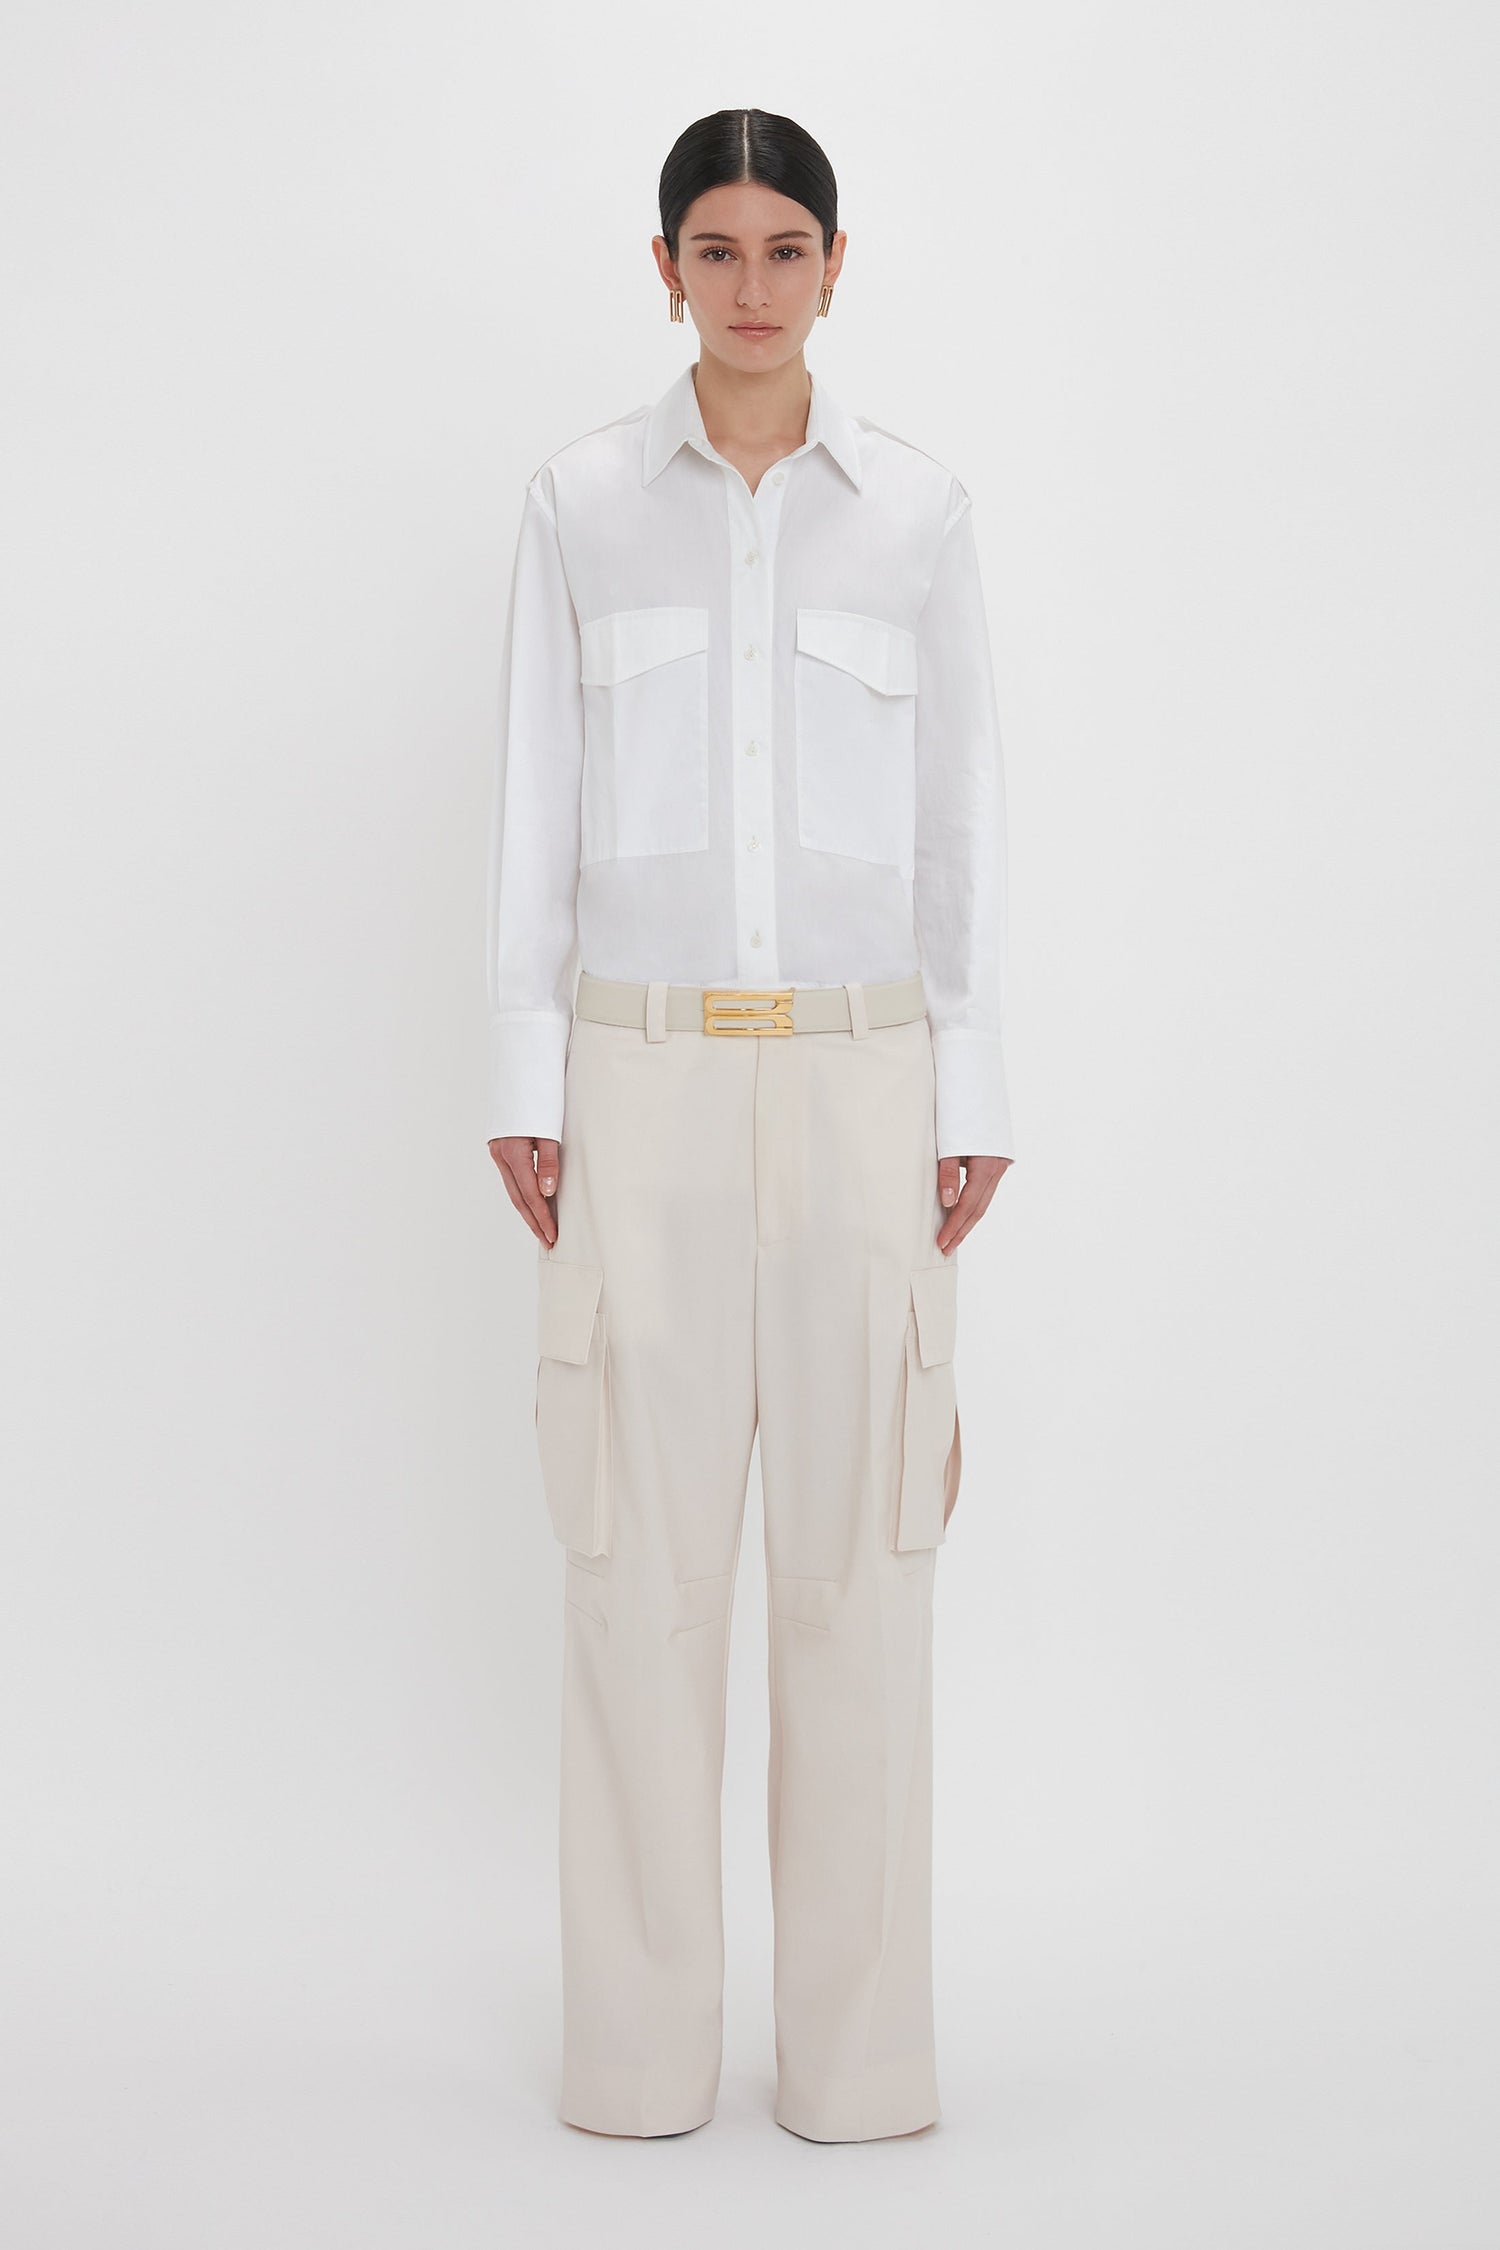 A person stands against a plain white background wearing an Oversized Pocket Shirt In White by Victoria Beckham made from organic cotton and cream-colored Relaxed Cargo Trousers featuring a gold belt buckle.